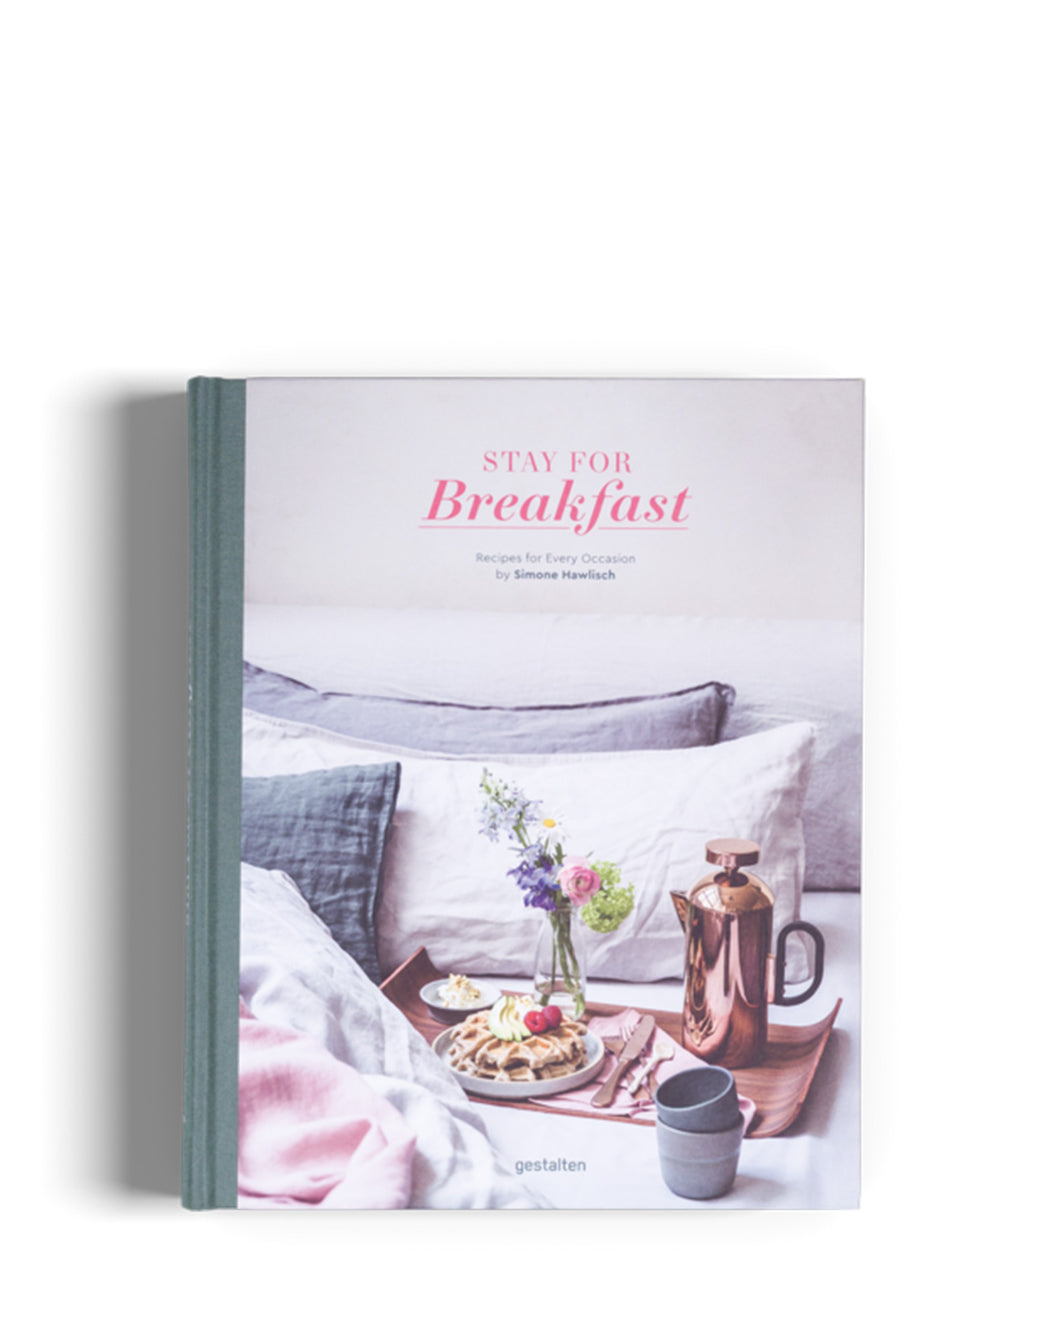 Stay For Breakfast - Recipes for Every Occasion